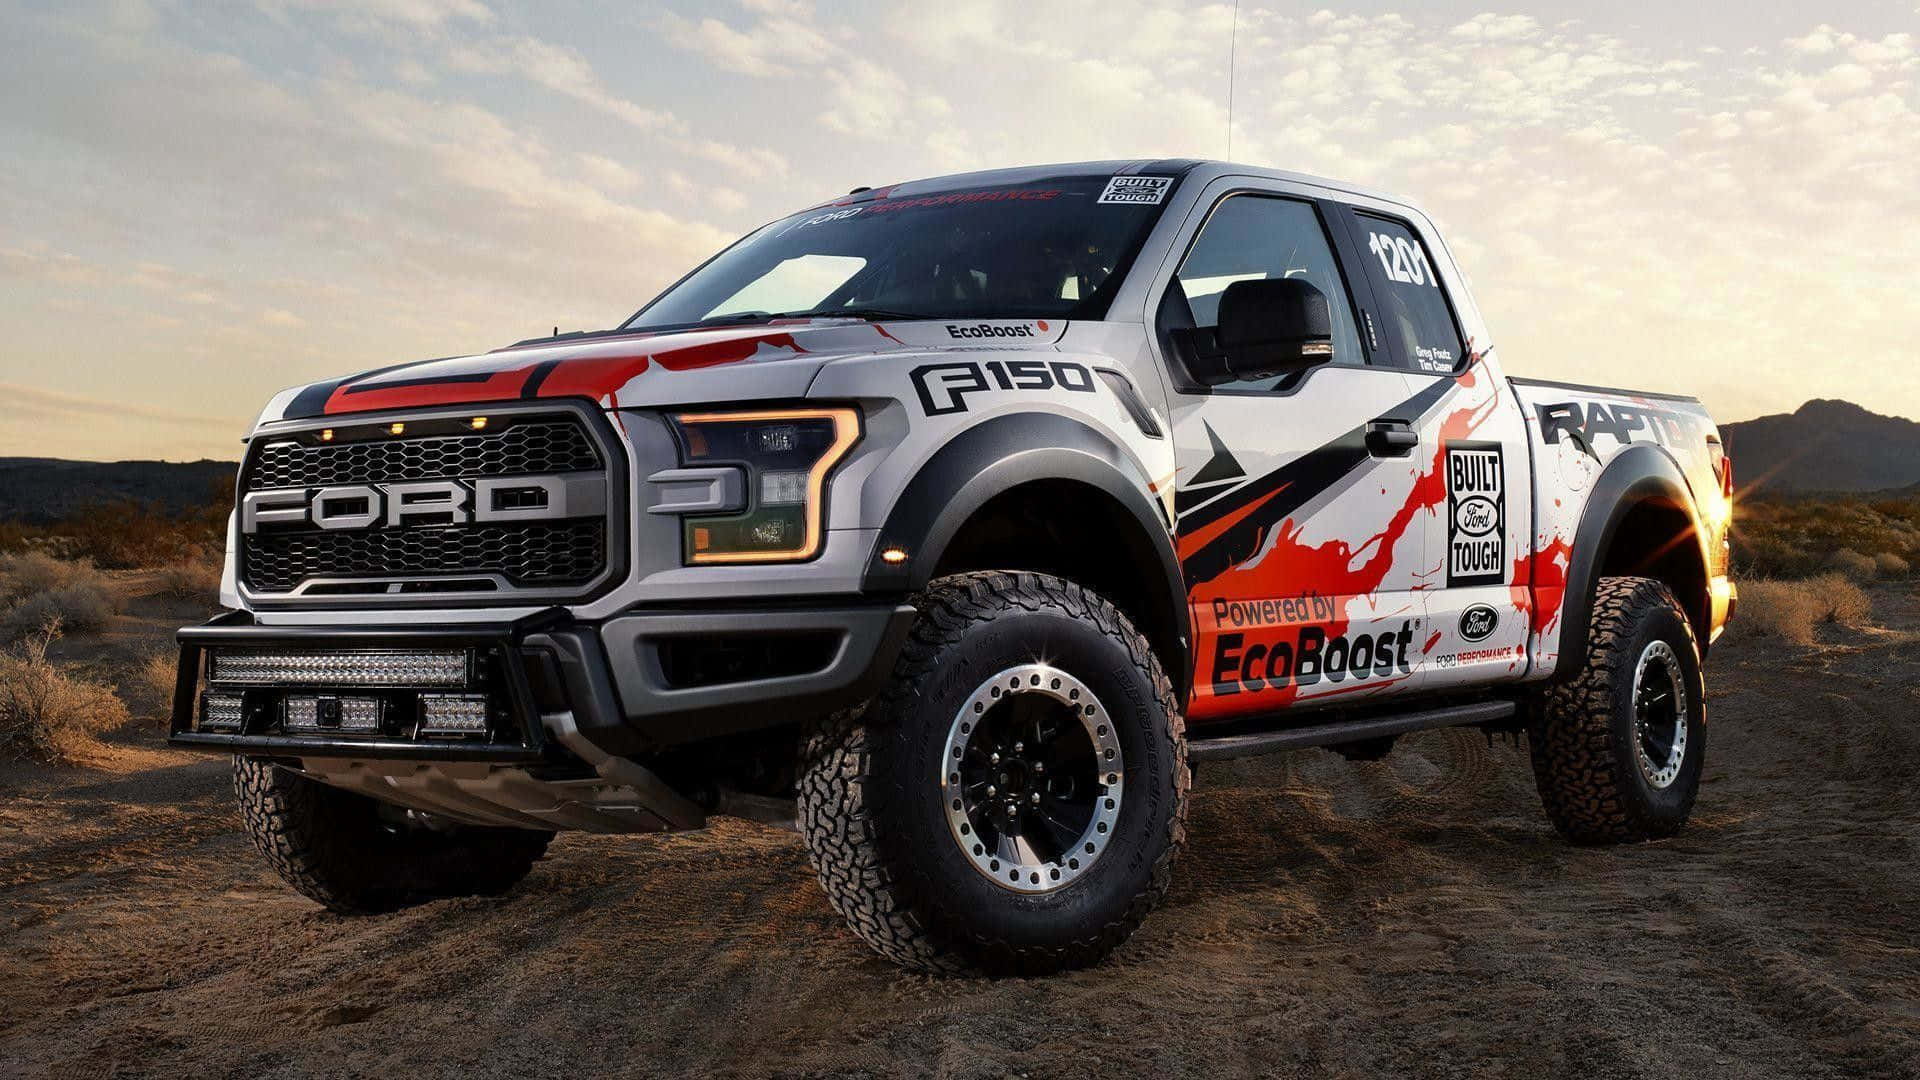 The Ford F - 150 Rpc Is Driving On A Dirt Road Background